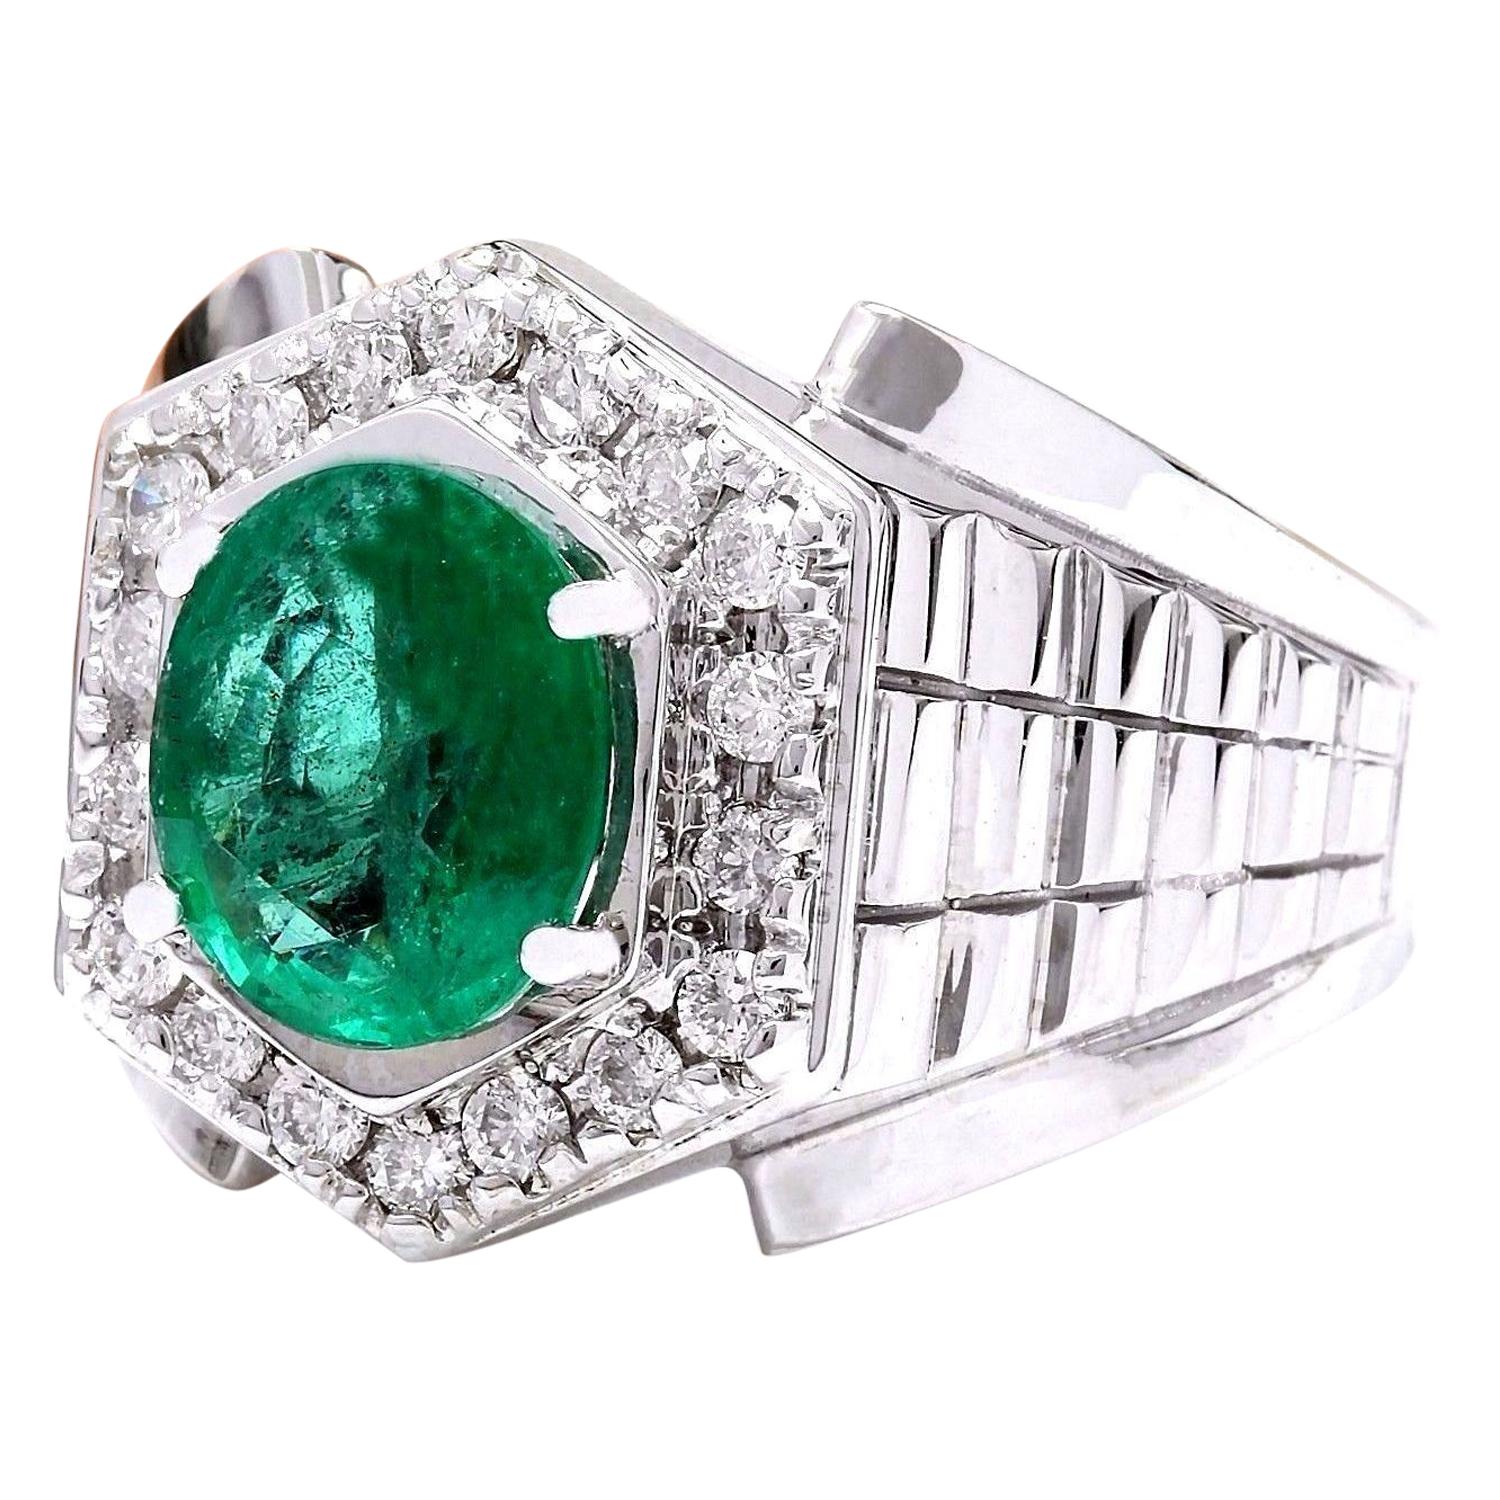 3.30 Carat Natural Emerald 14K Solid White Gold Diamond Ring
 Item Type: Ring
 Item Style: Engagement
 Material: 14K White Gold
 Mainstone: Emerald
 Stone Color: Green
 Stone Weight: 2.65 Carat
 Stone Shape: Oval
 Stone Quantity: 1
 Stone